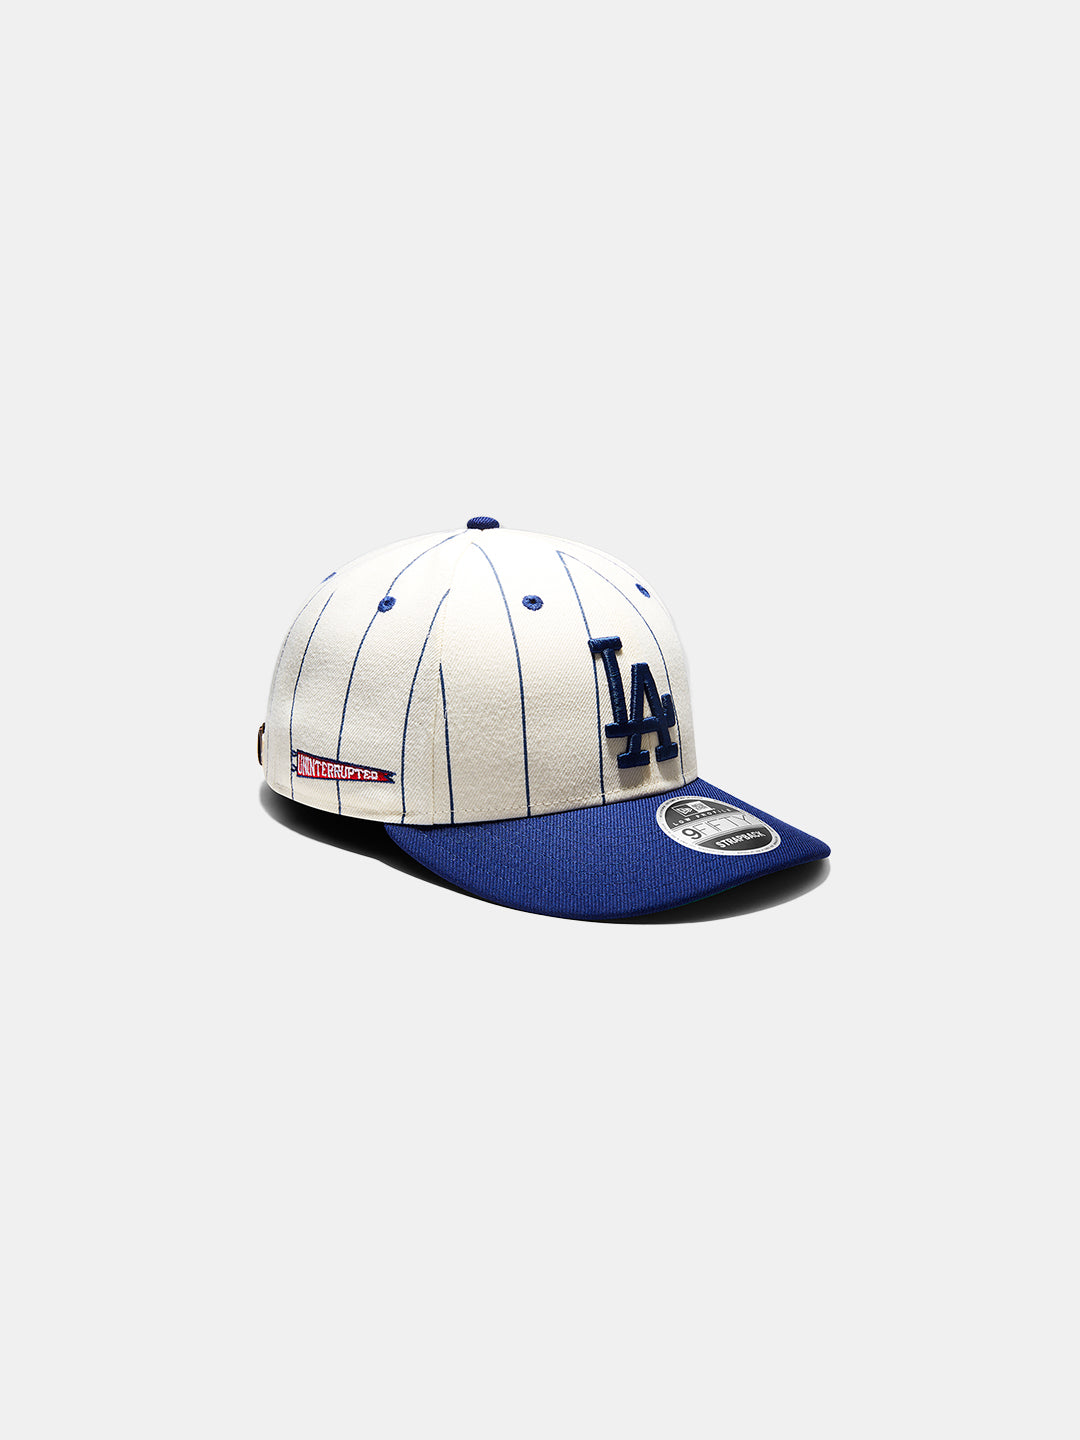 LA Dodgers X UNINTERRUPTED Low Profile 9FIFTY - white and blue striped hat, side view